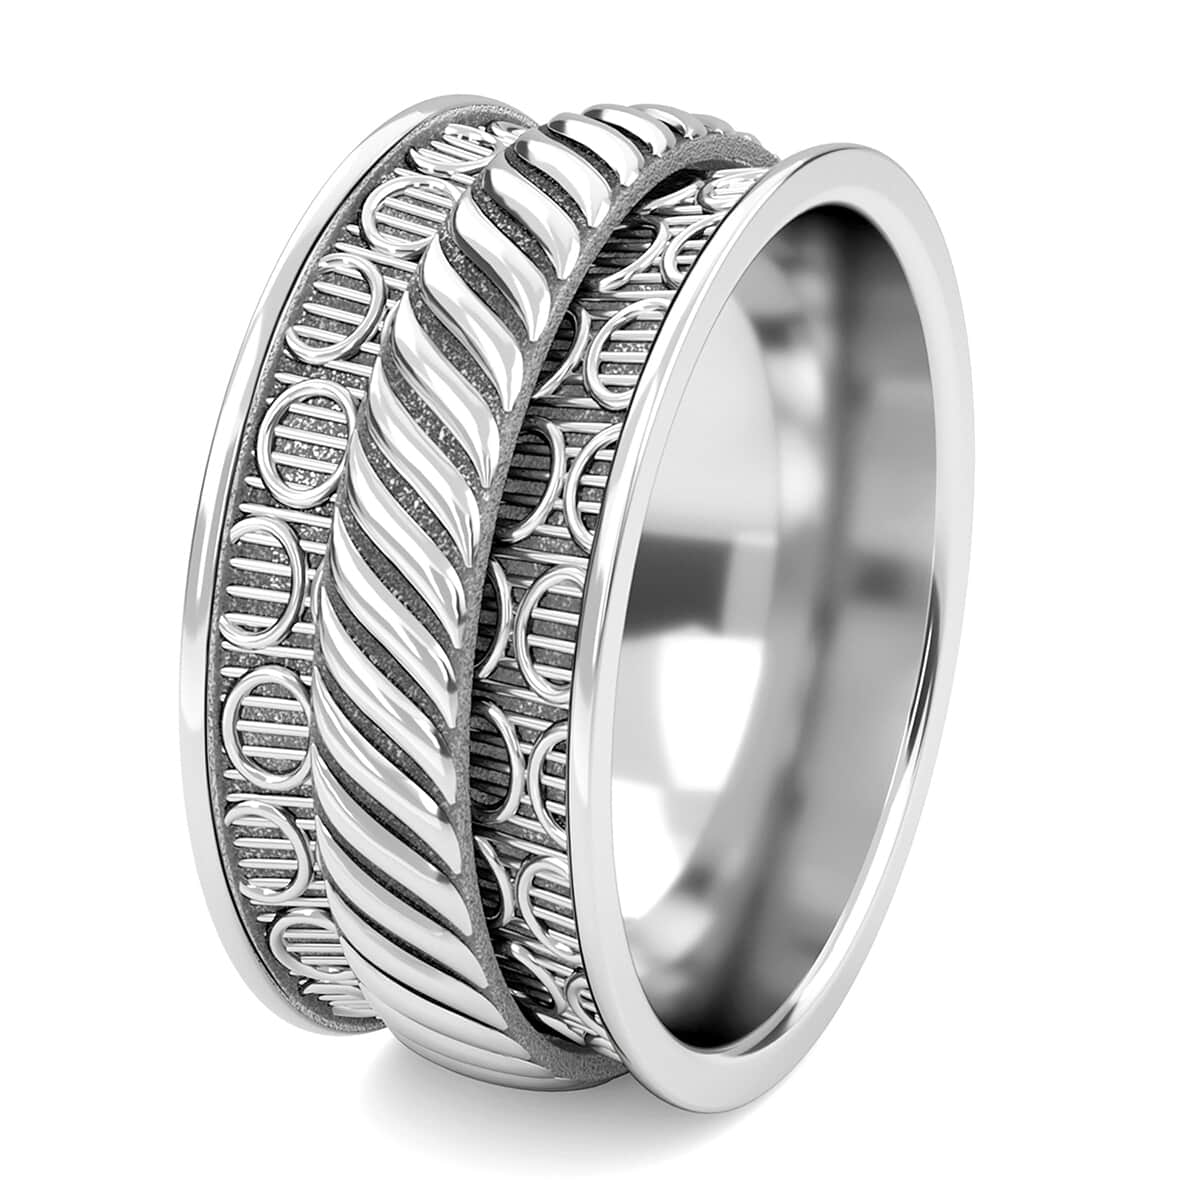 Sterling Silver Spinner Ring, Anxiety Ring for Women, Fidget Rings for Anxiety for Women, Stress Relieving Anxiety Ring (Size 5.0) (4.75 g) image number 5